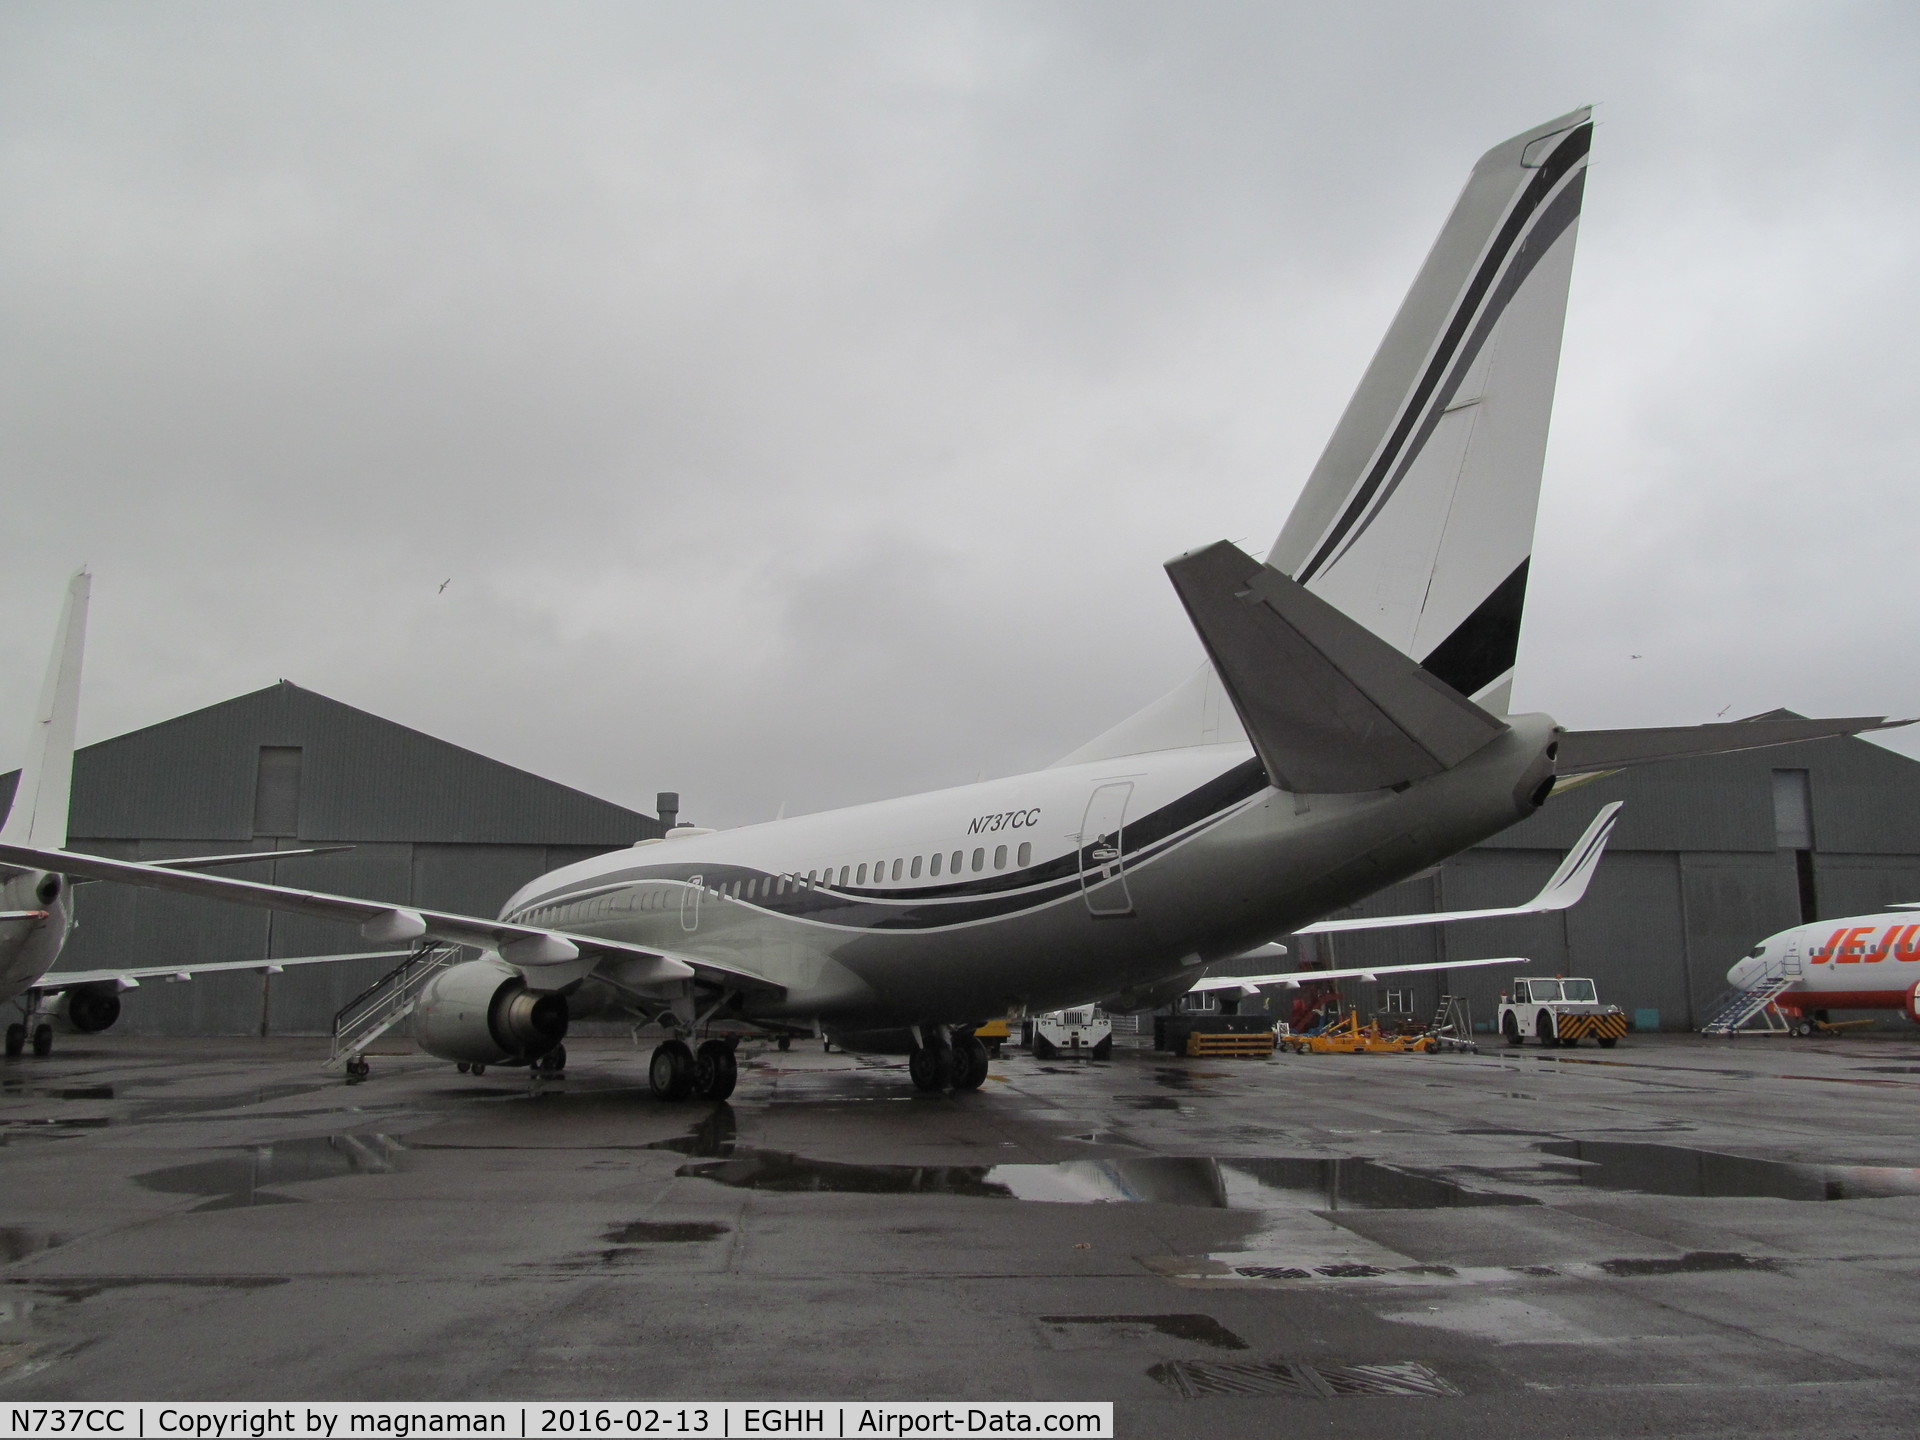 N737CC, 1999 Boeing 737-74Q/BBJ C/N 29135, along with many others at hurn